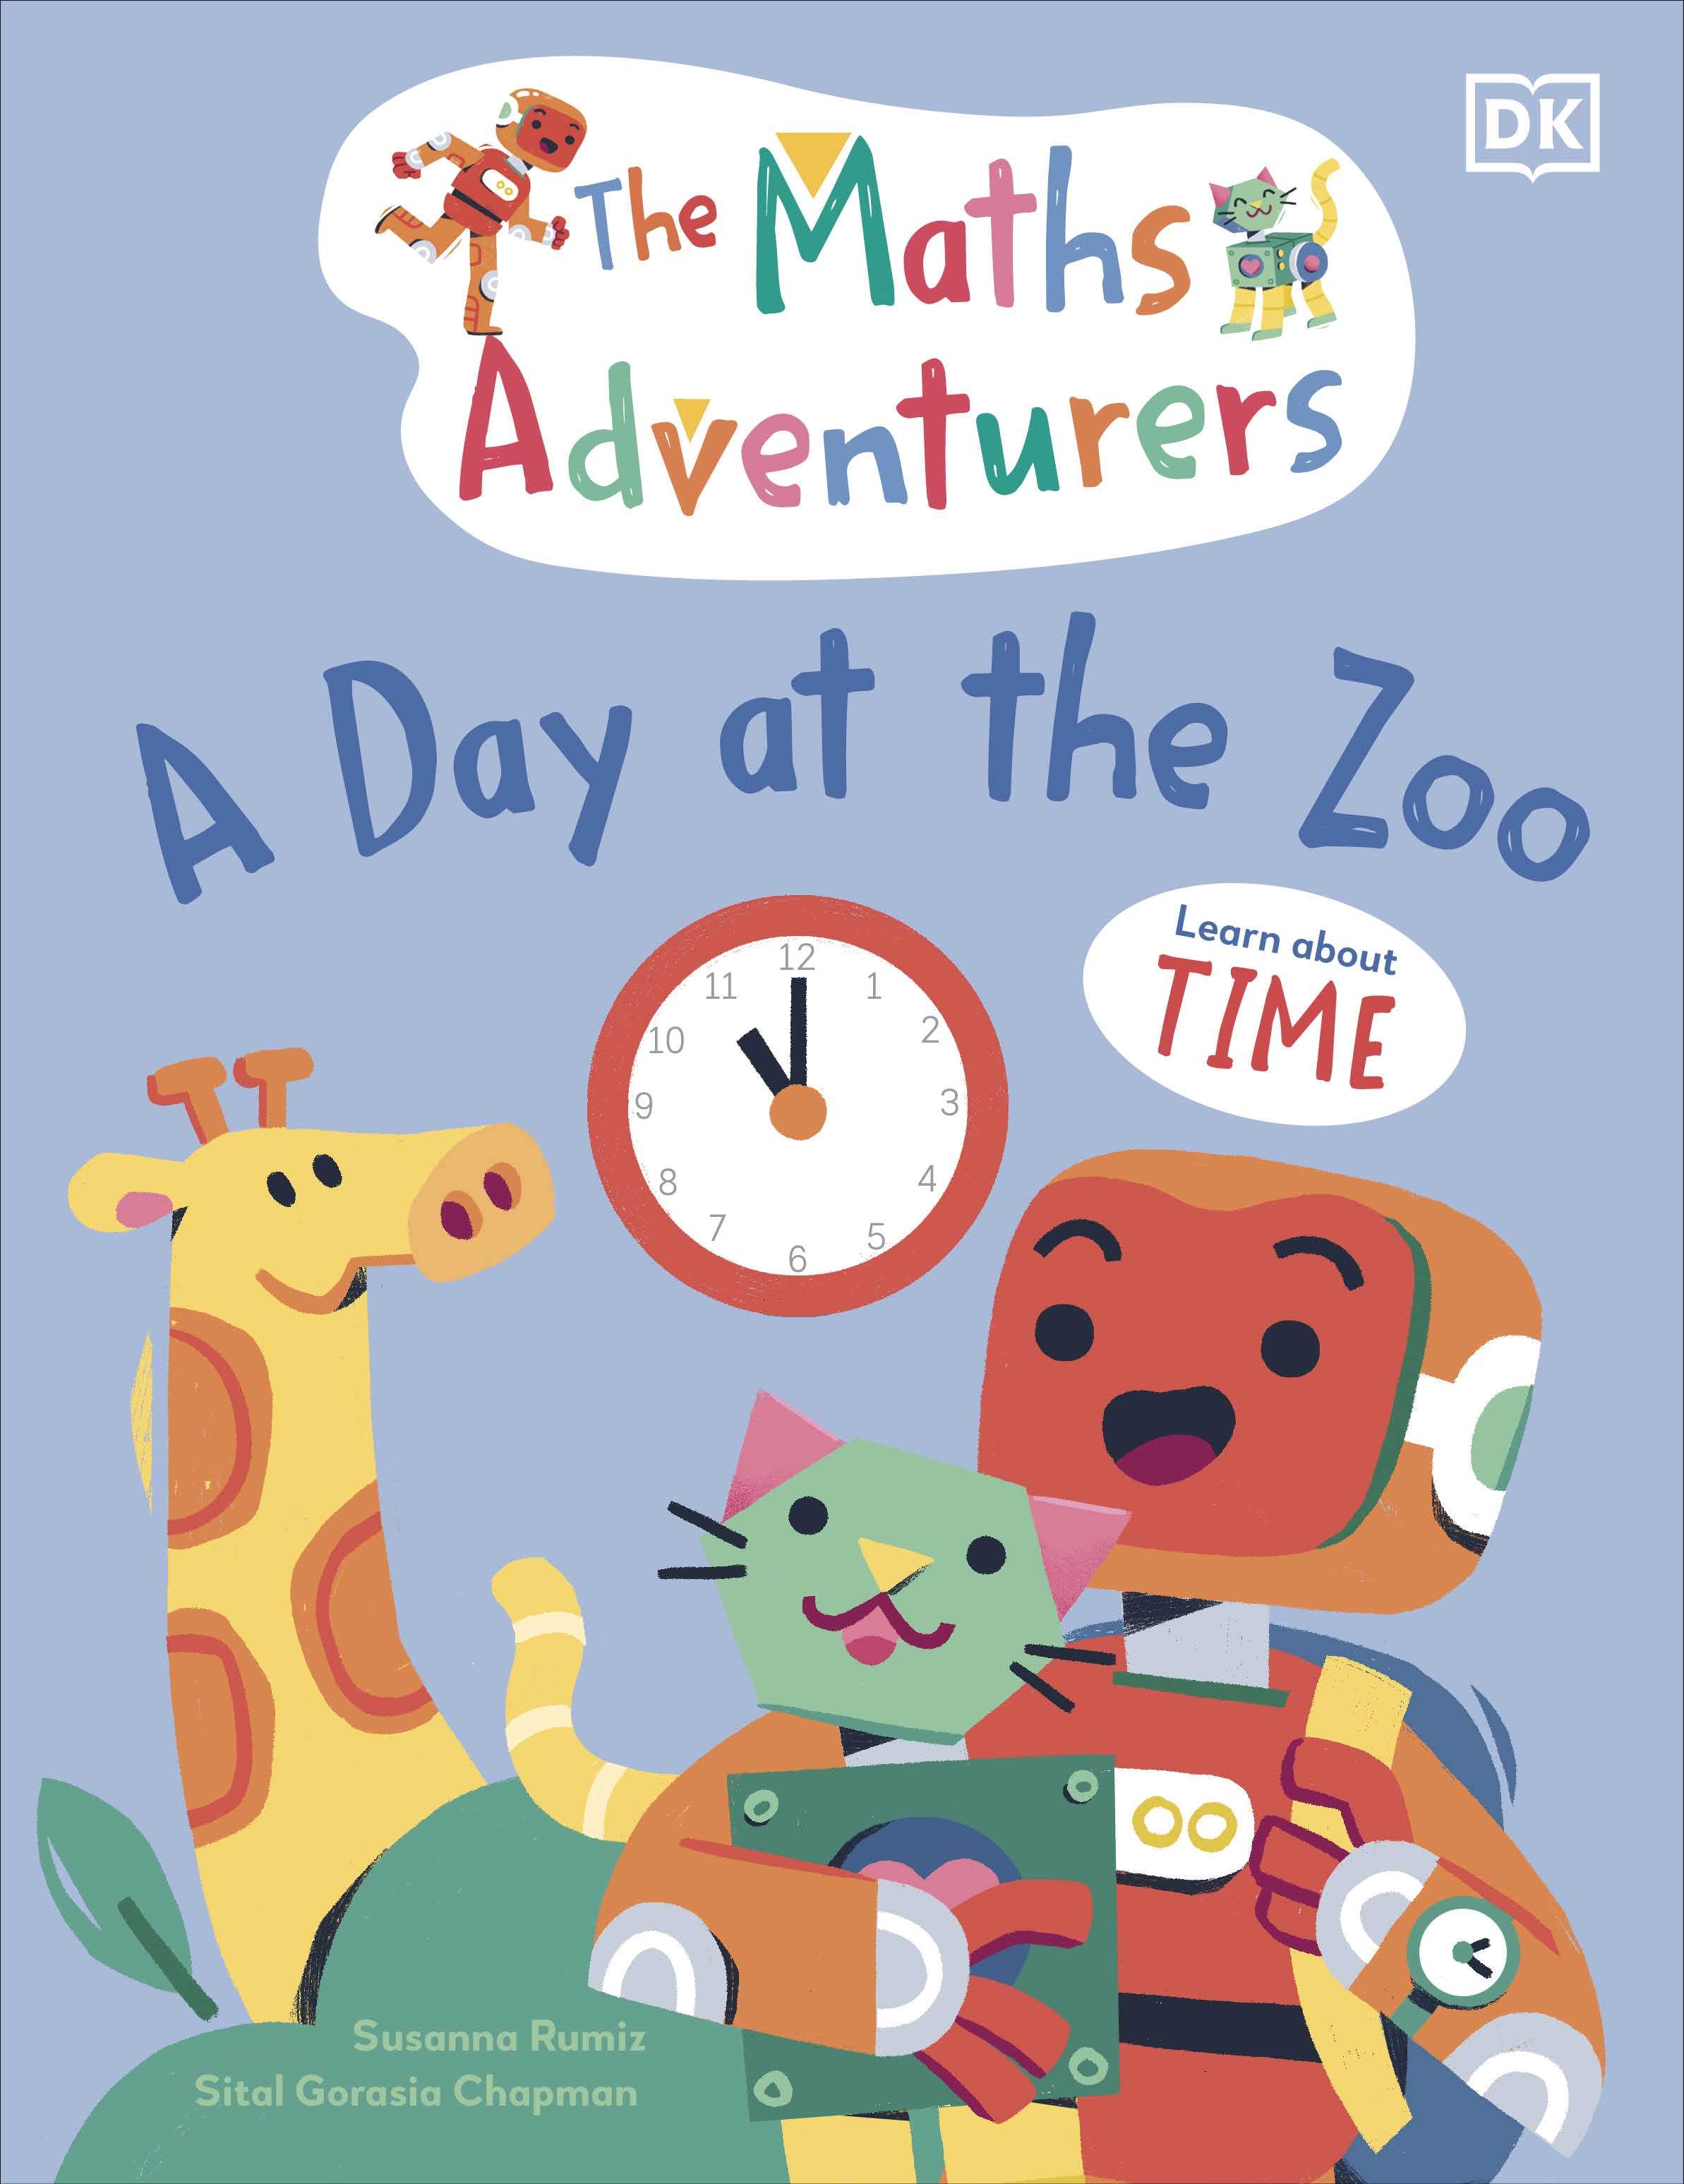 A Day at the Zoo (The Maths Adventurers)